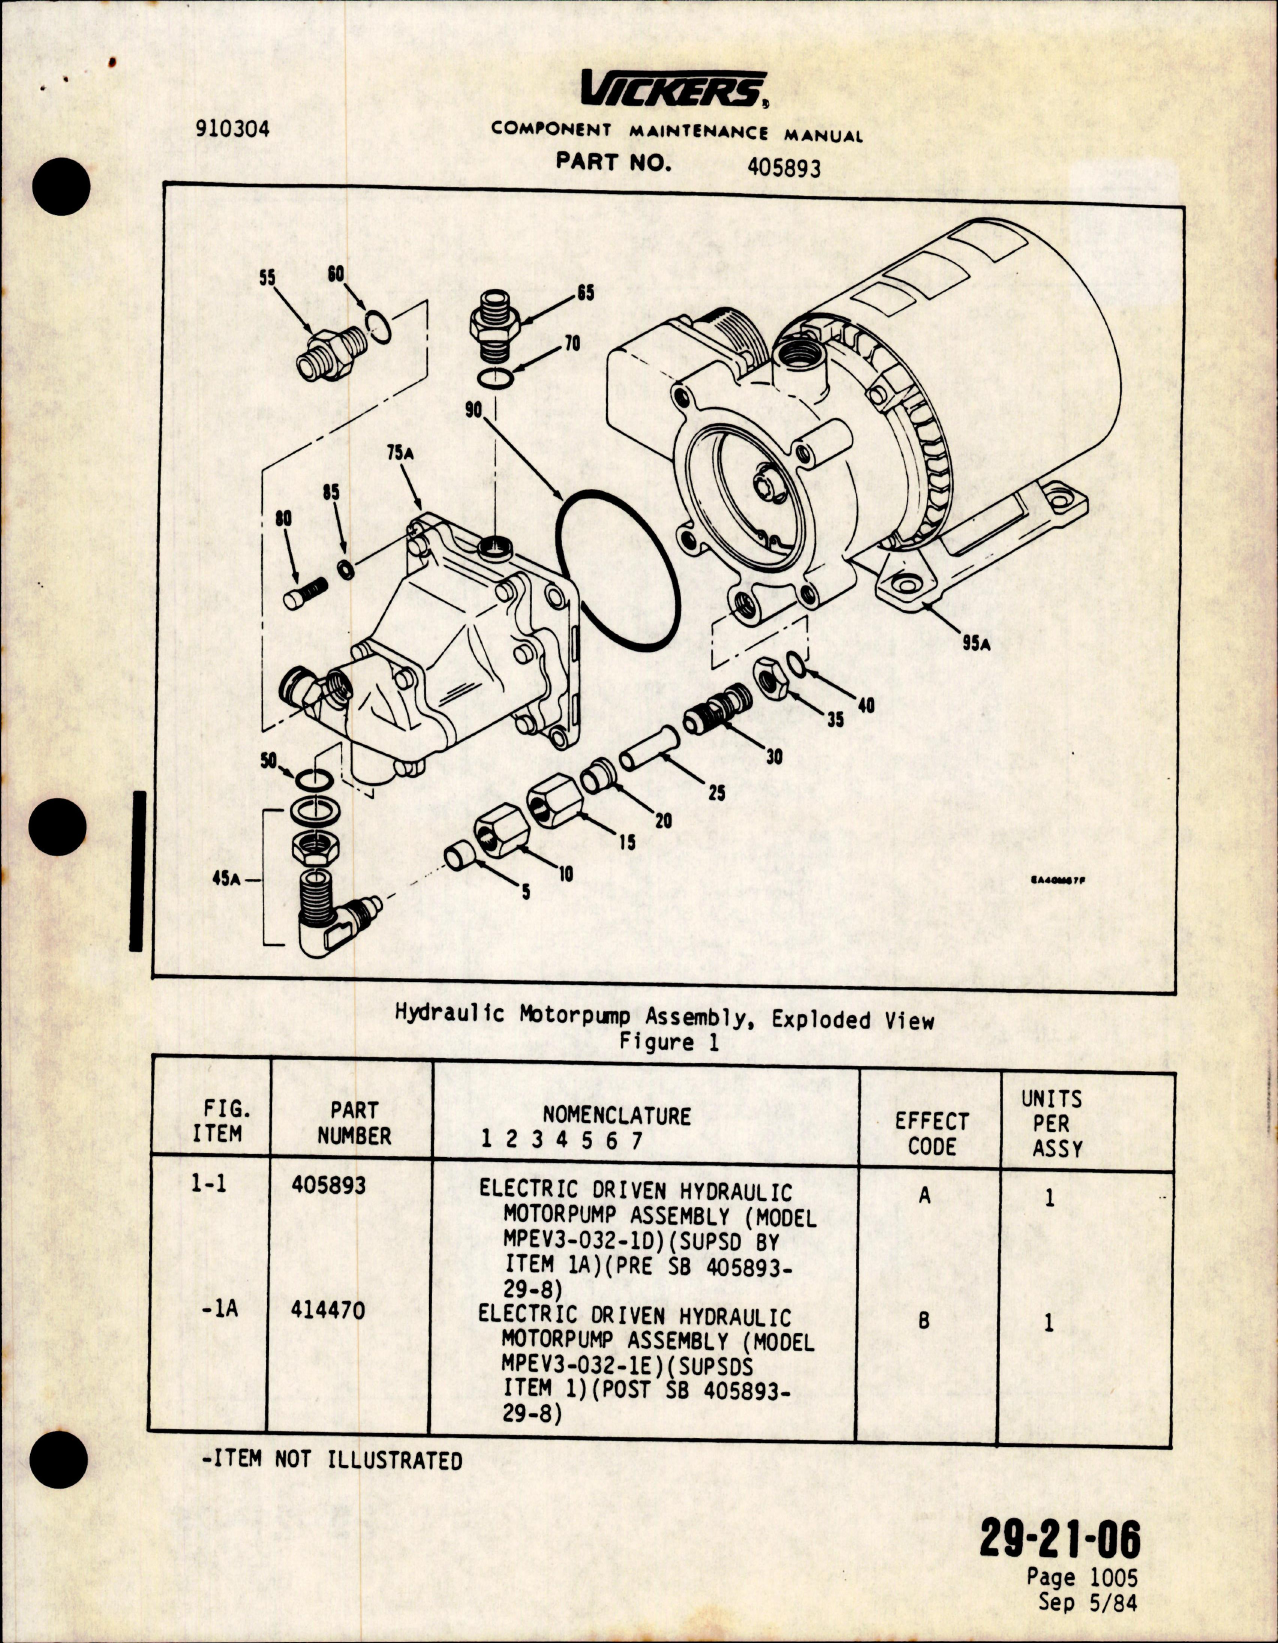 Sample page 5 from AirCorps Library document: Maintenance with Illustrated Parys List for Hydraulic Motorpump Assembly - Part 405893 - Revision No. 5 